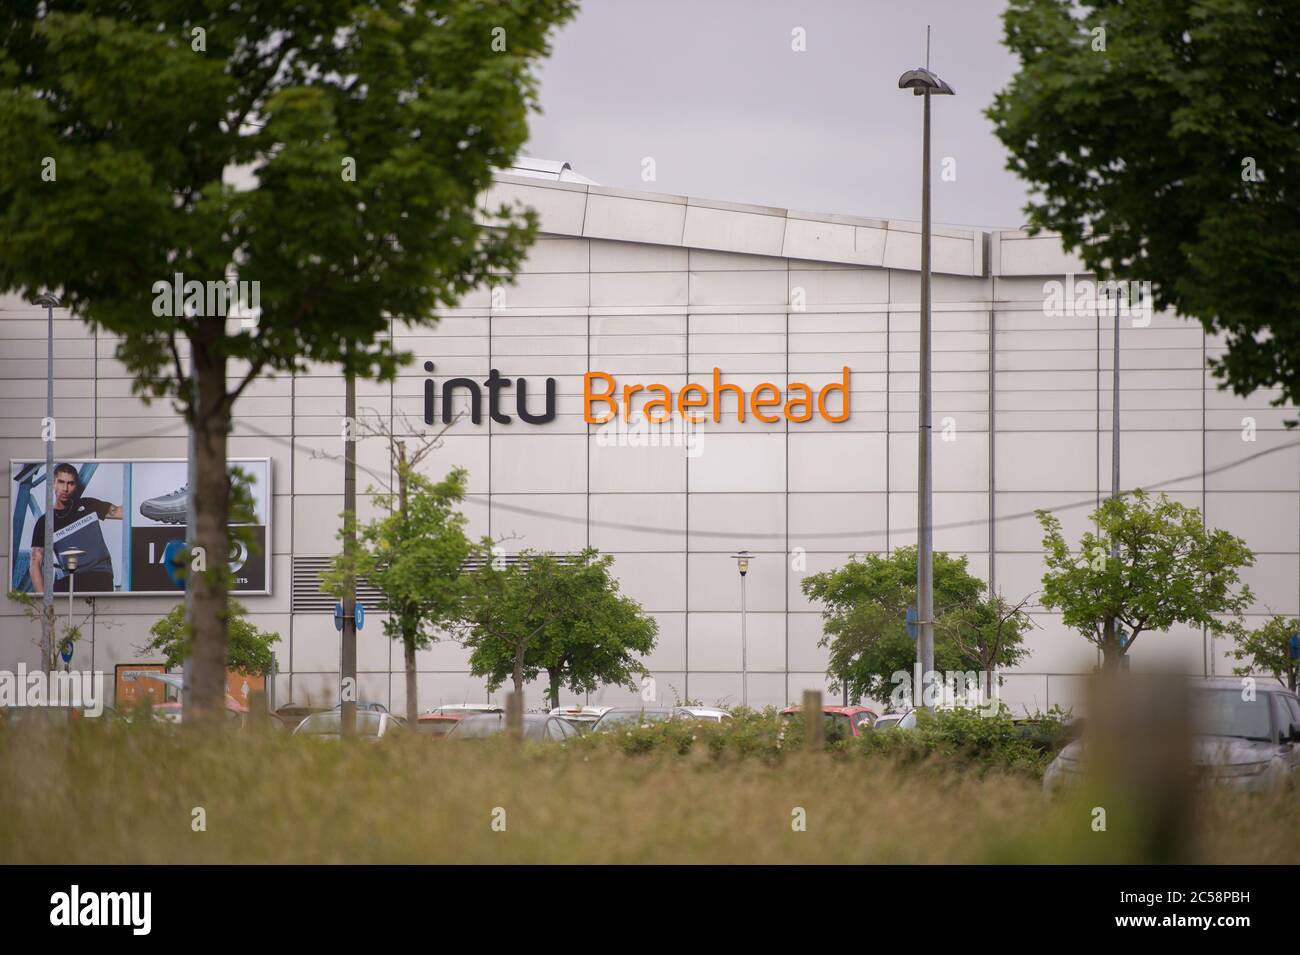 Glasgow, Scotland, UK. 1st July, 2020. Pictured: Intu Braehead Shopping Centre in Glasgow. Shopping centre giant Intu has entered administration, placing thousands of jobs in doubt as it sits in £4.5 billion in debt. Intu were struggling even before the Coronavirus (COVID19) crisis happened, sighting the way customers are shopping differently combined with the declining value of its shopping centres has put the final nail in the coffin. Credit: Colin Fisher/Alamy Live News Stock Photo